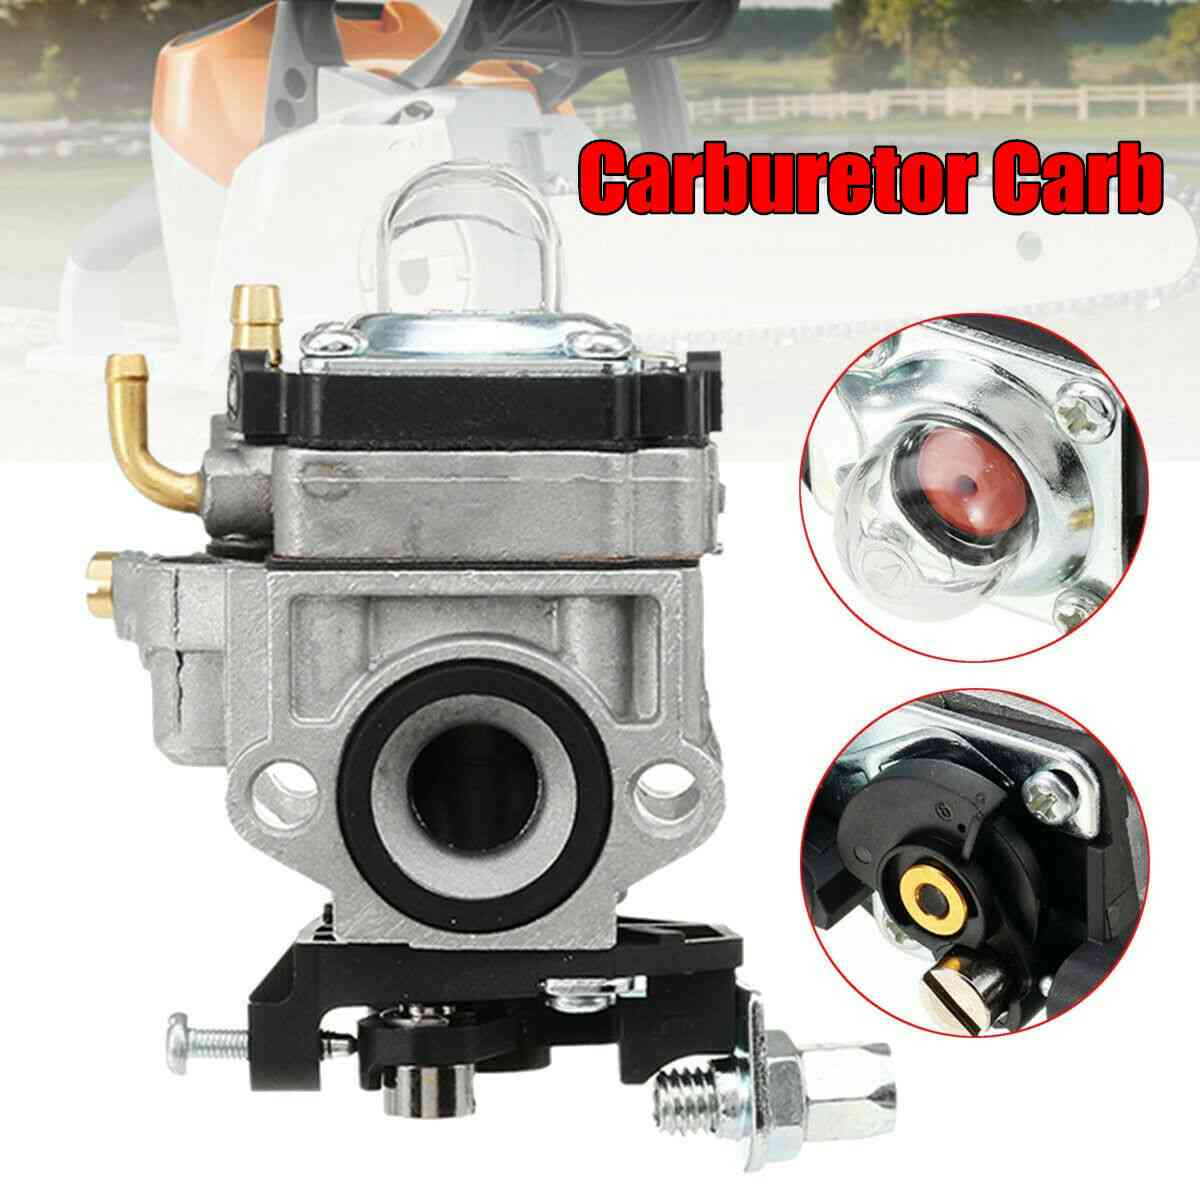 Carburetor Carb - Various Strimmer Hedge, Trimmer Brush Cutter Chainsaw